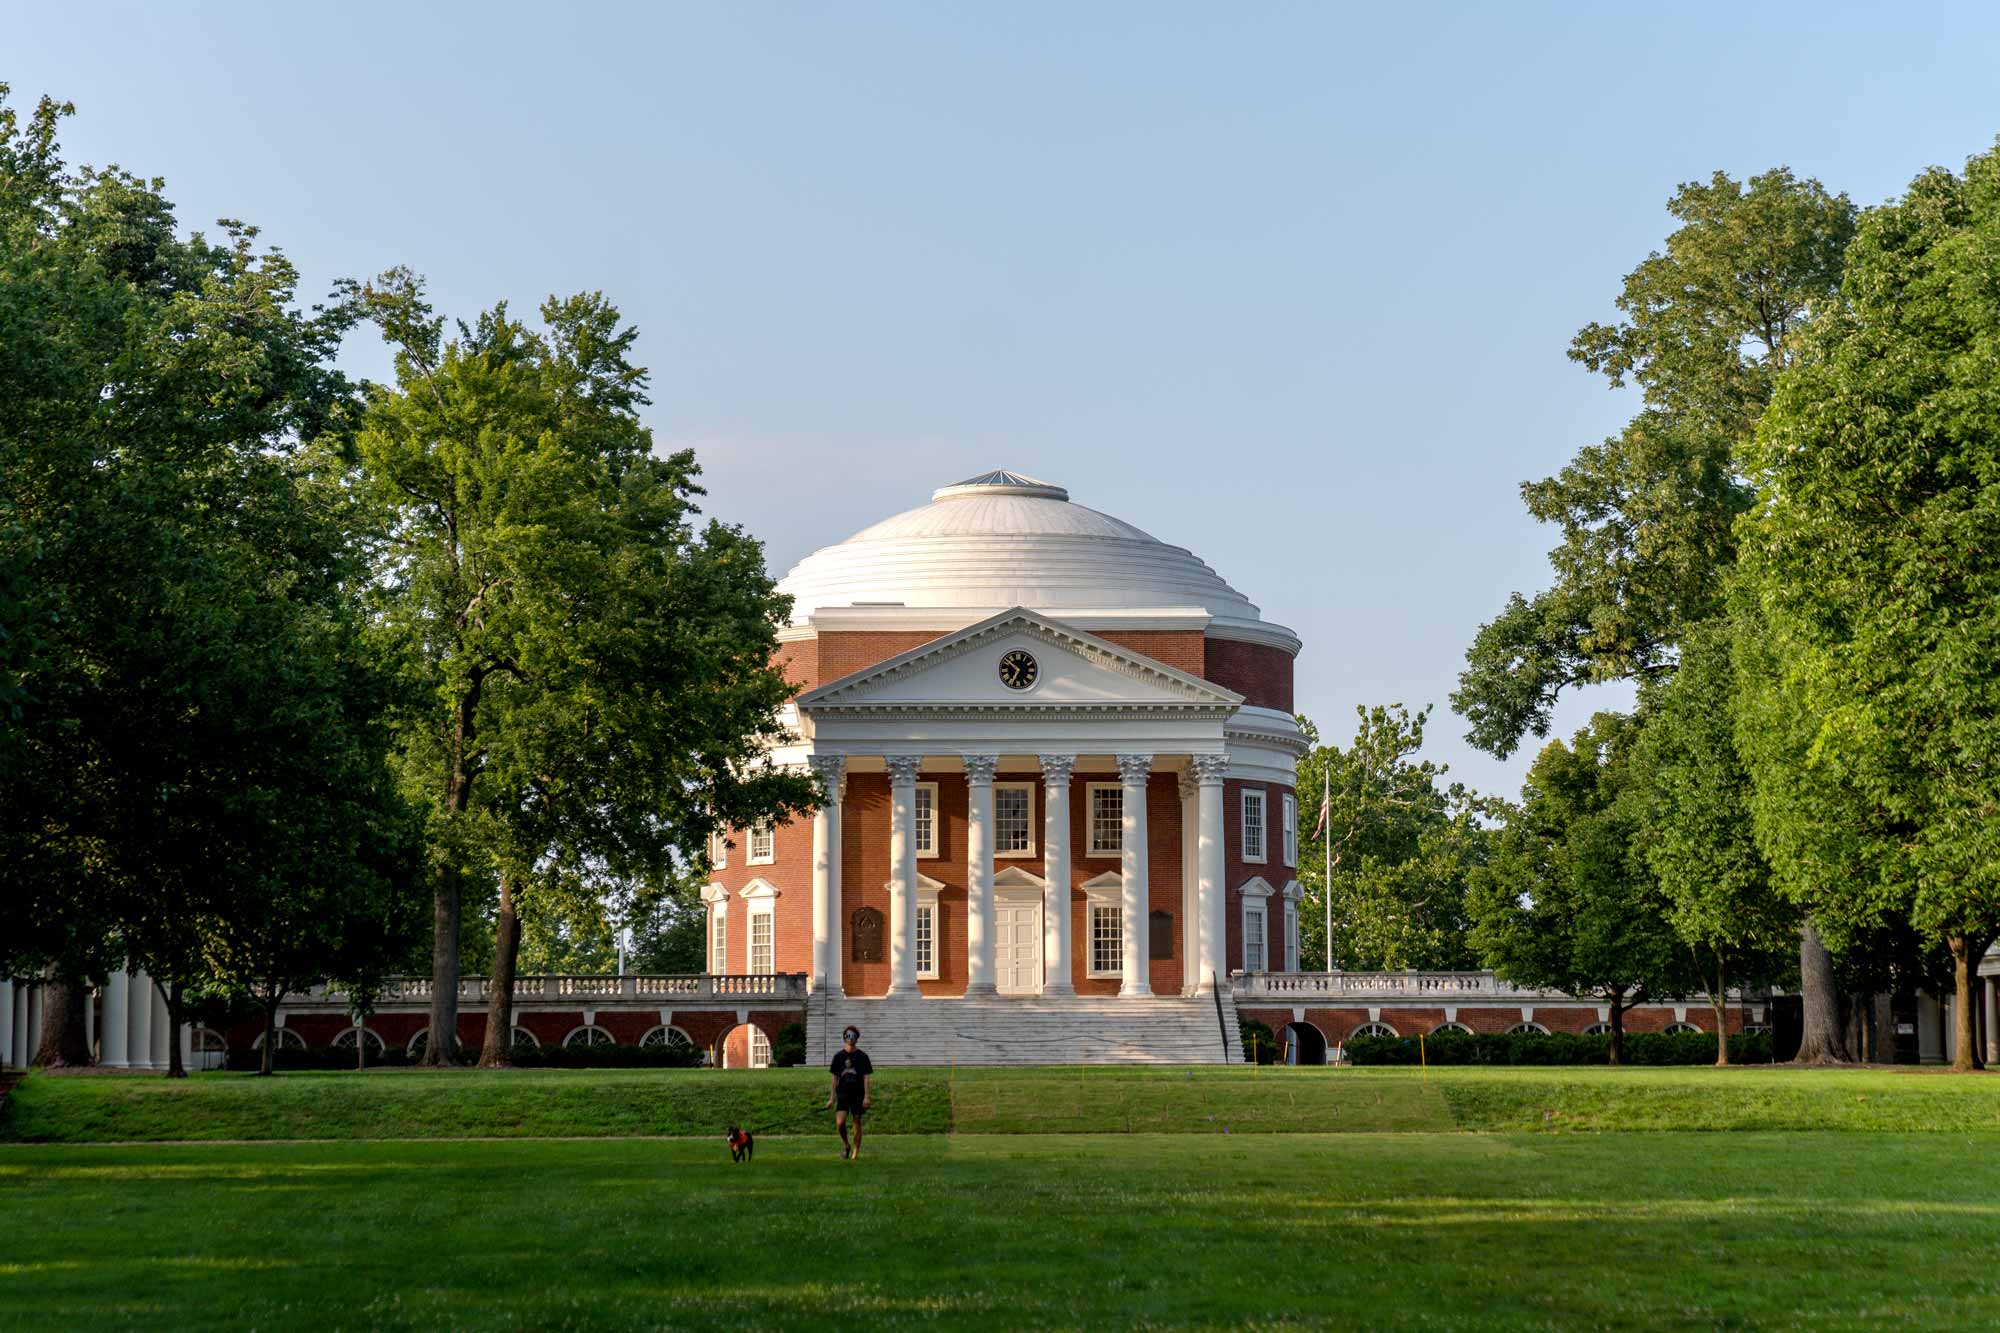 An evening view of the Rotunda